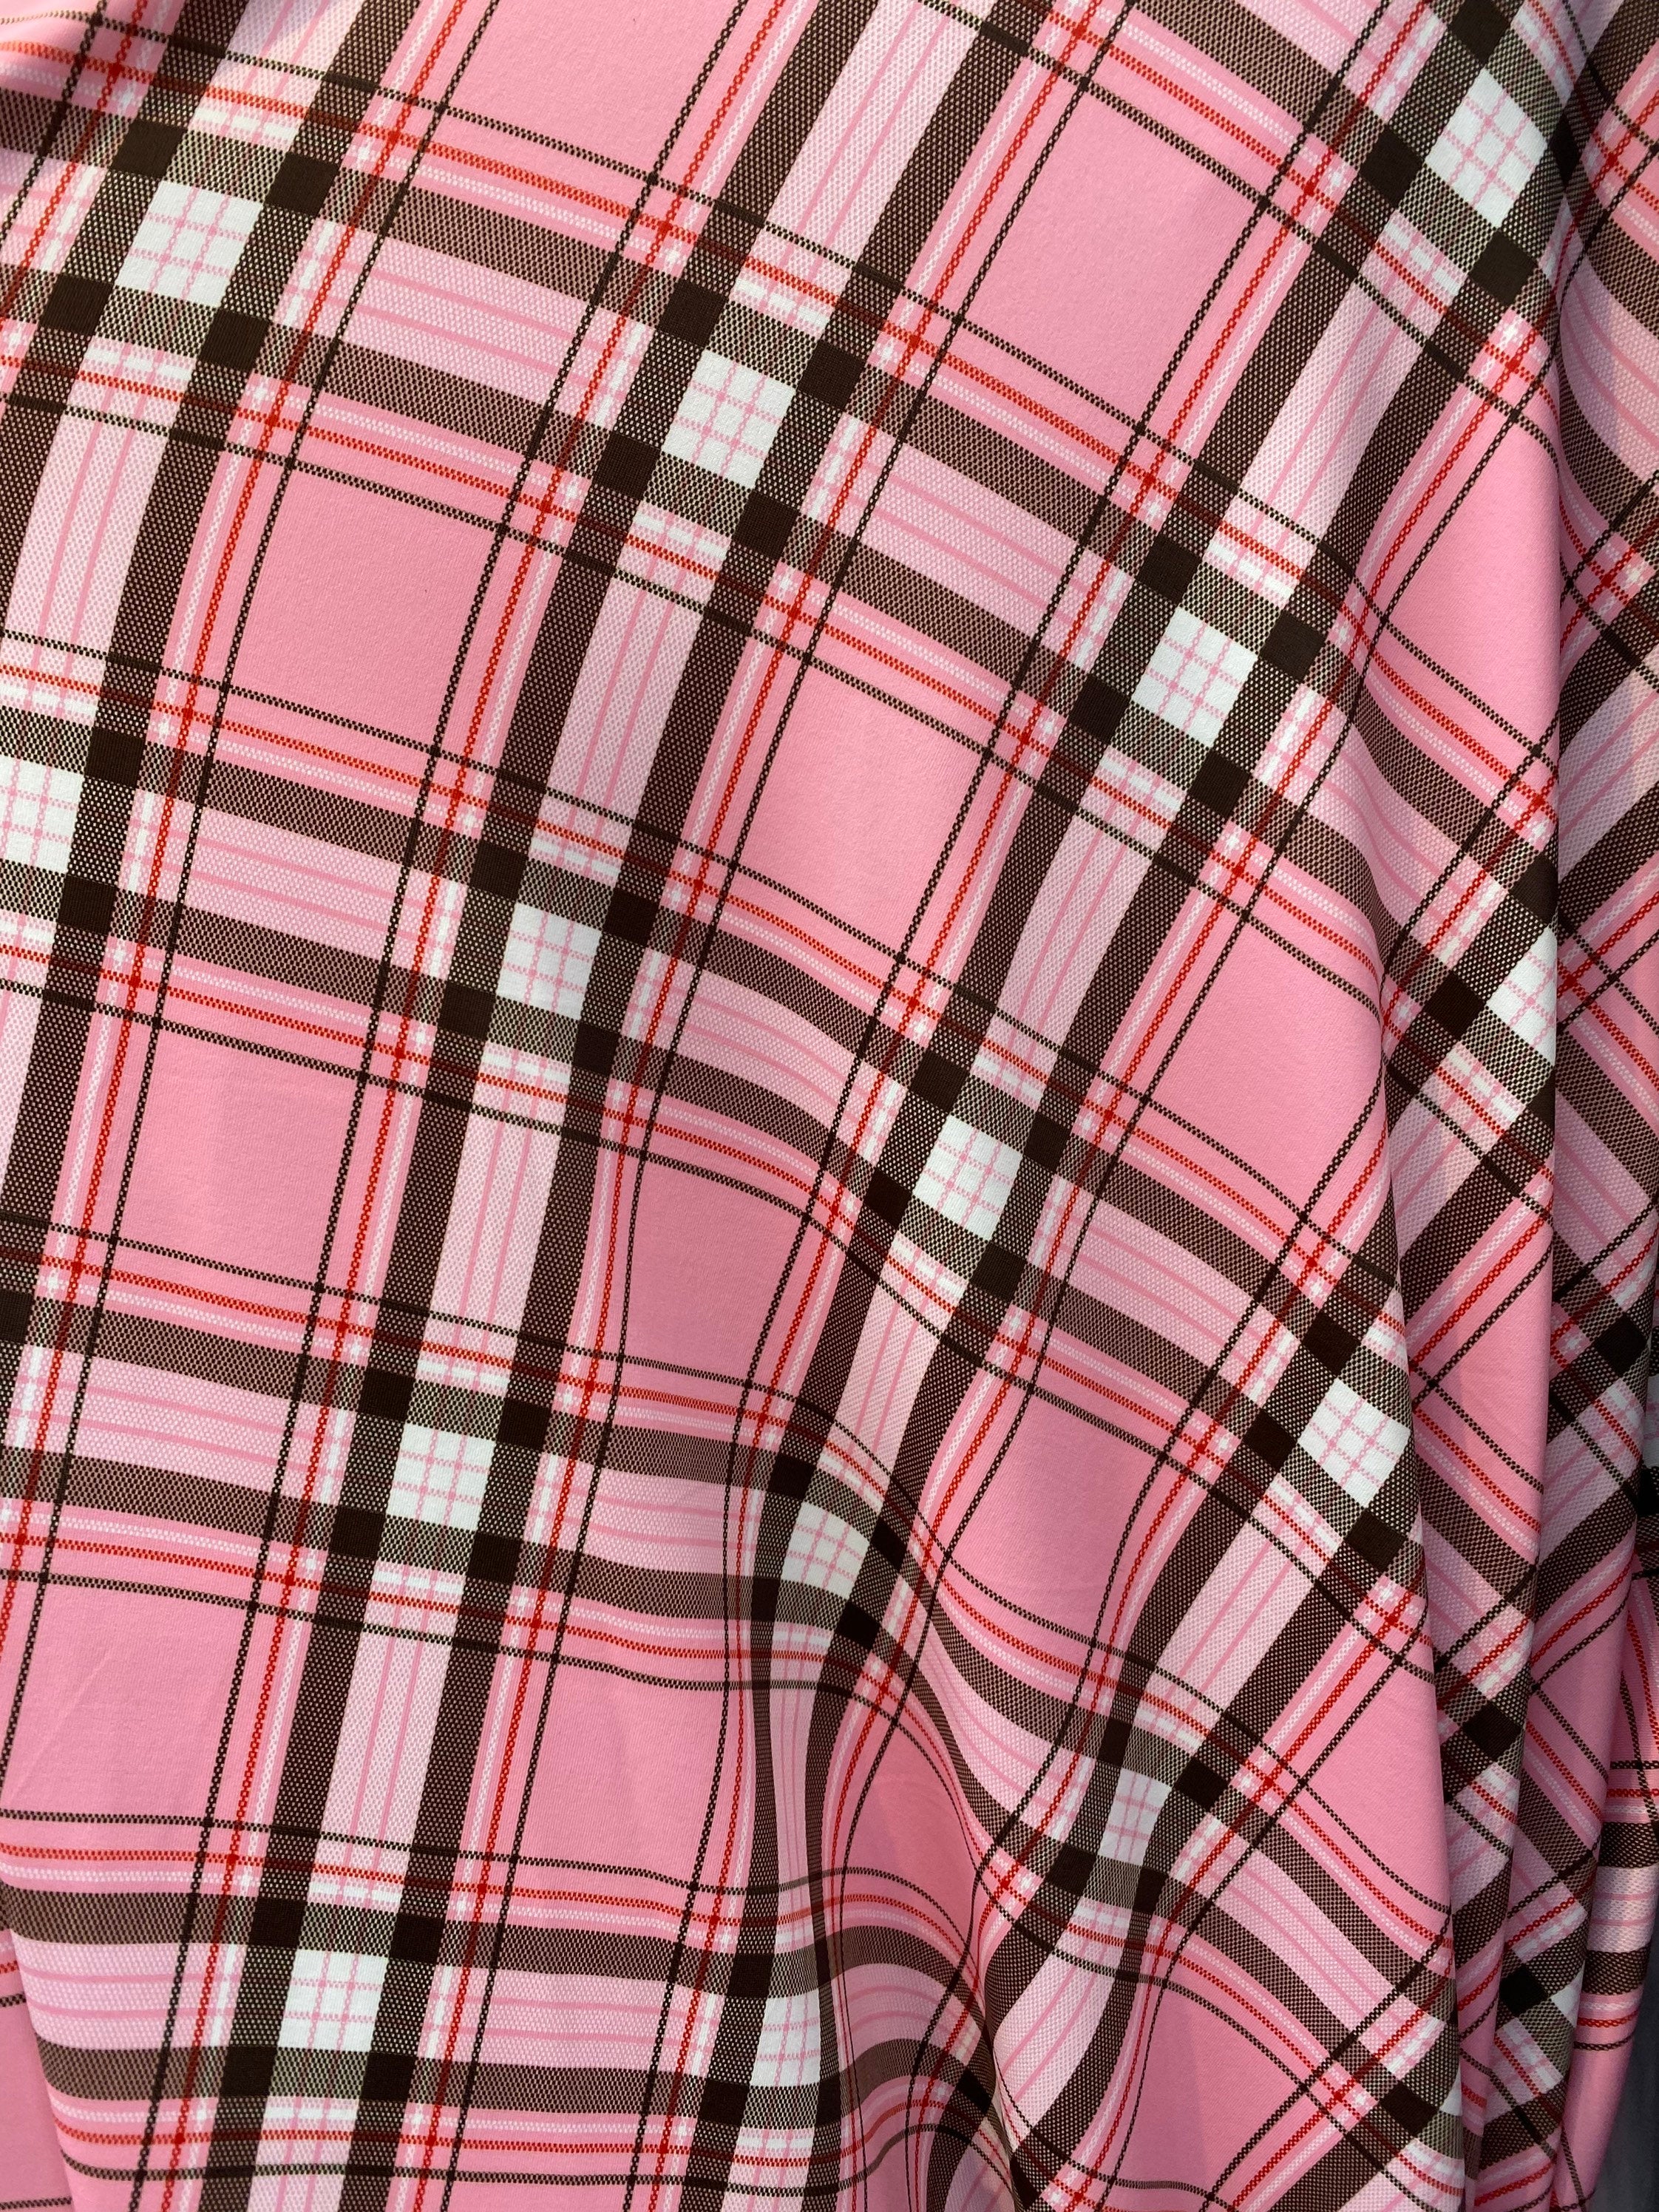 Pink Plaid Spandex Lycra 60" Wide || Dance Fabric by the Yard